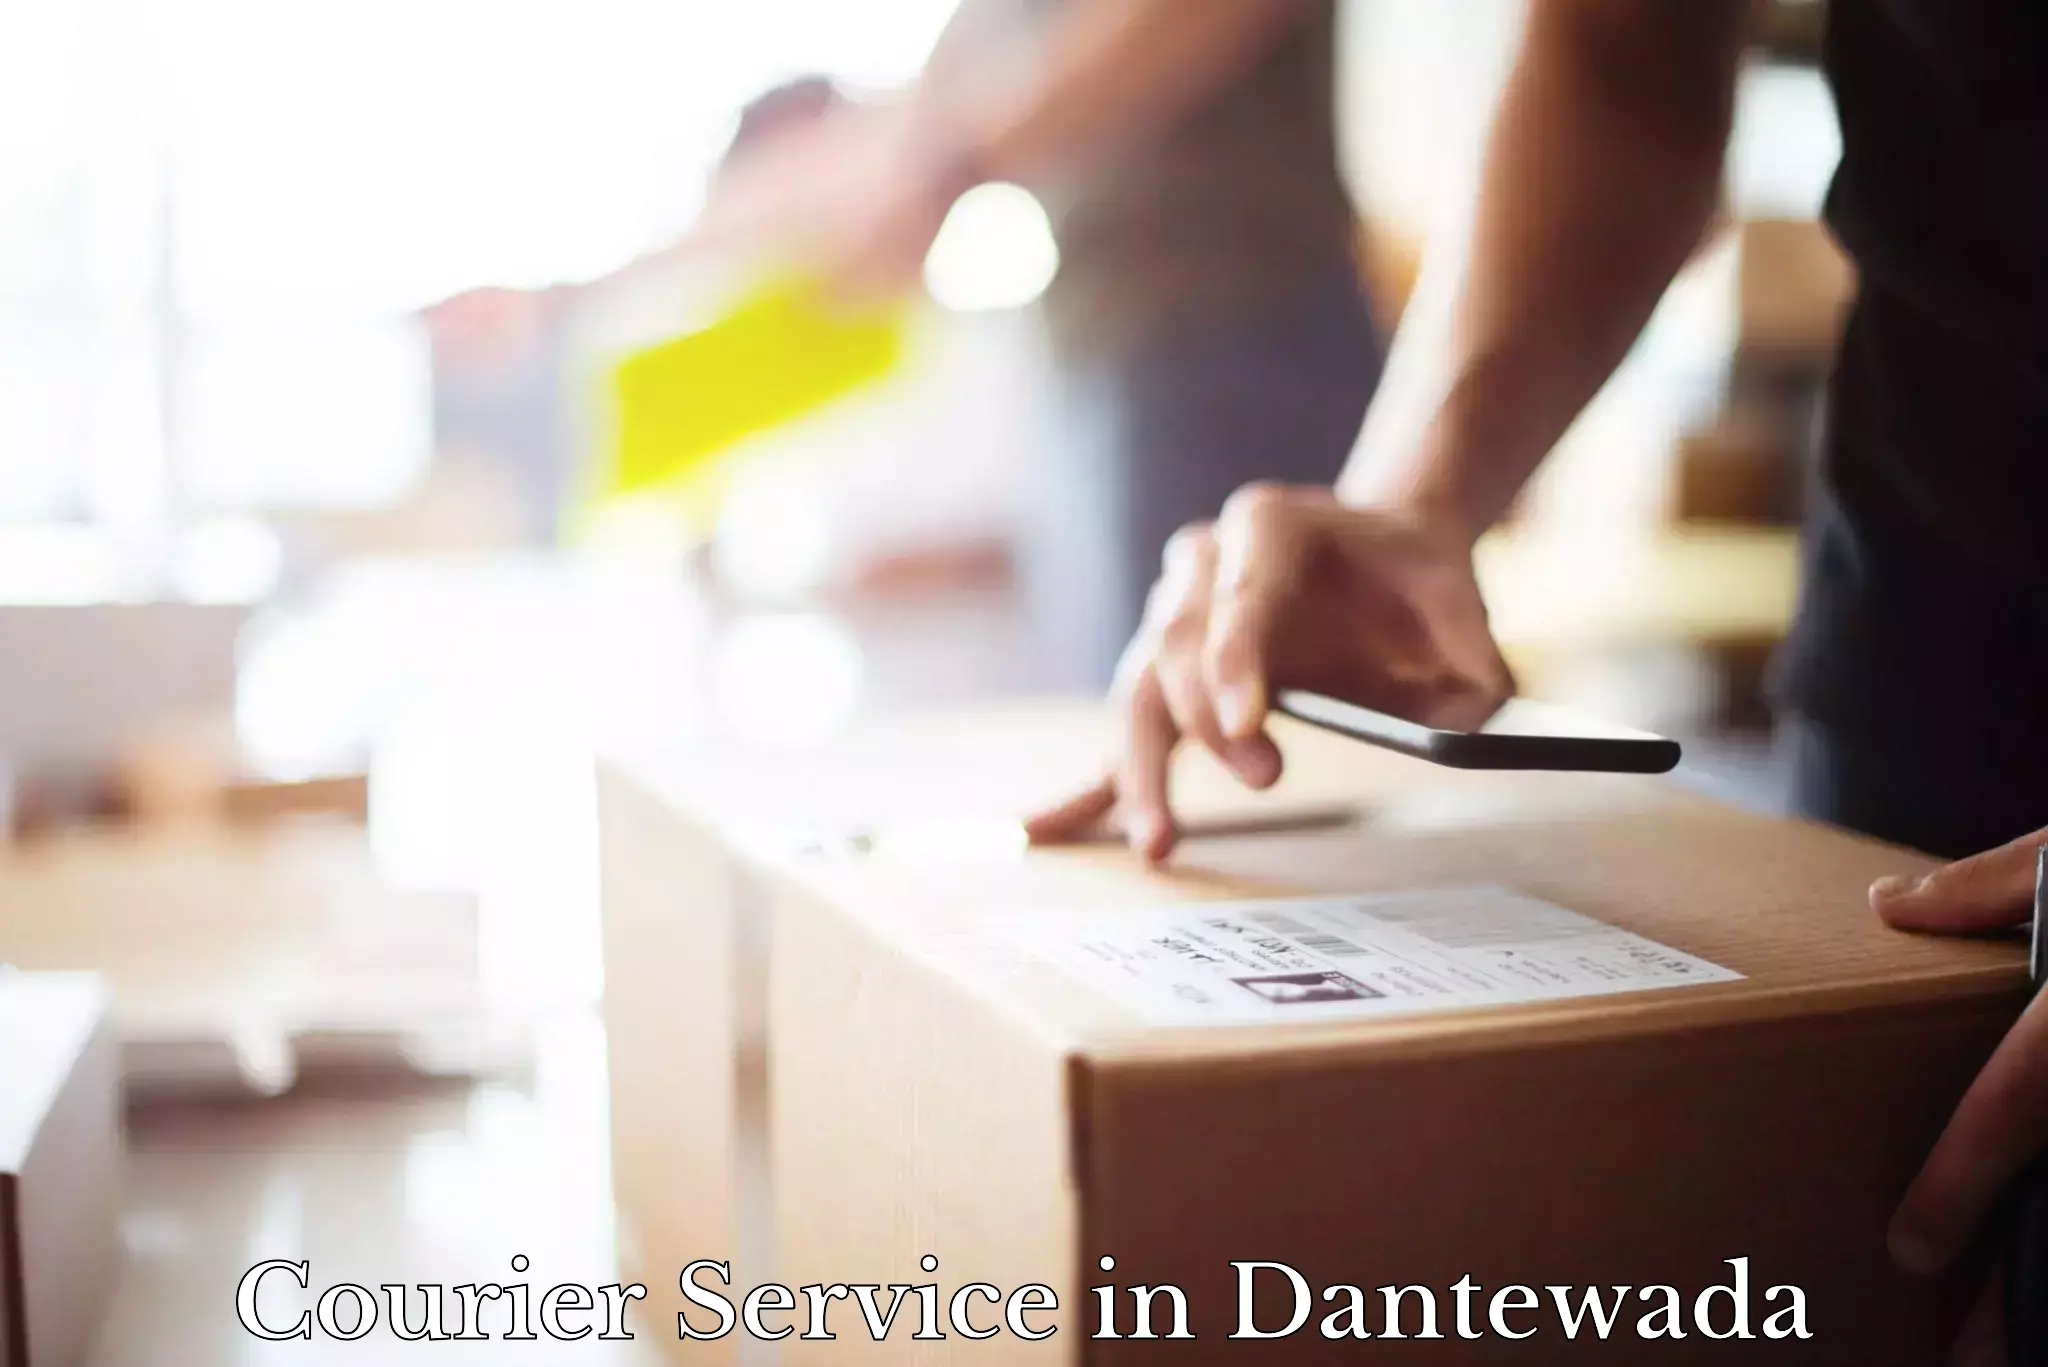 Express package services in Dantewada